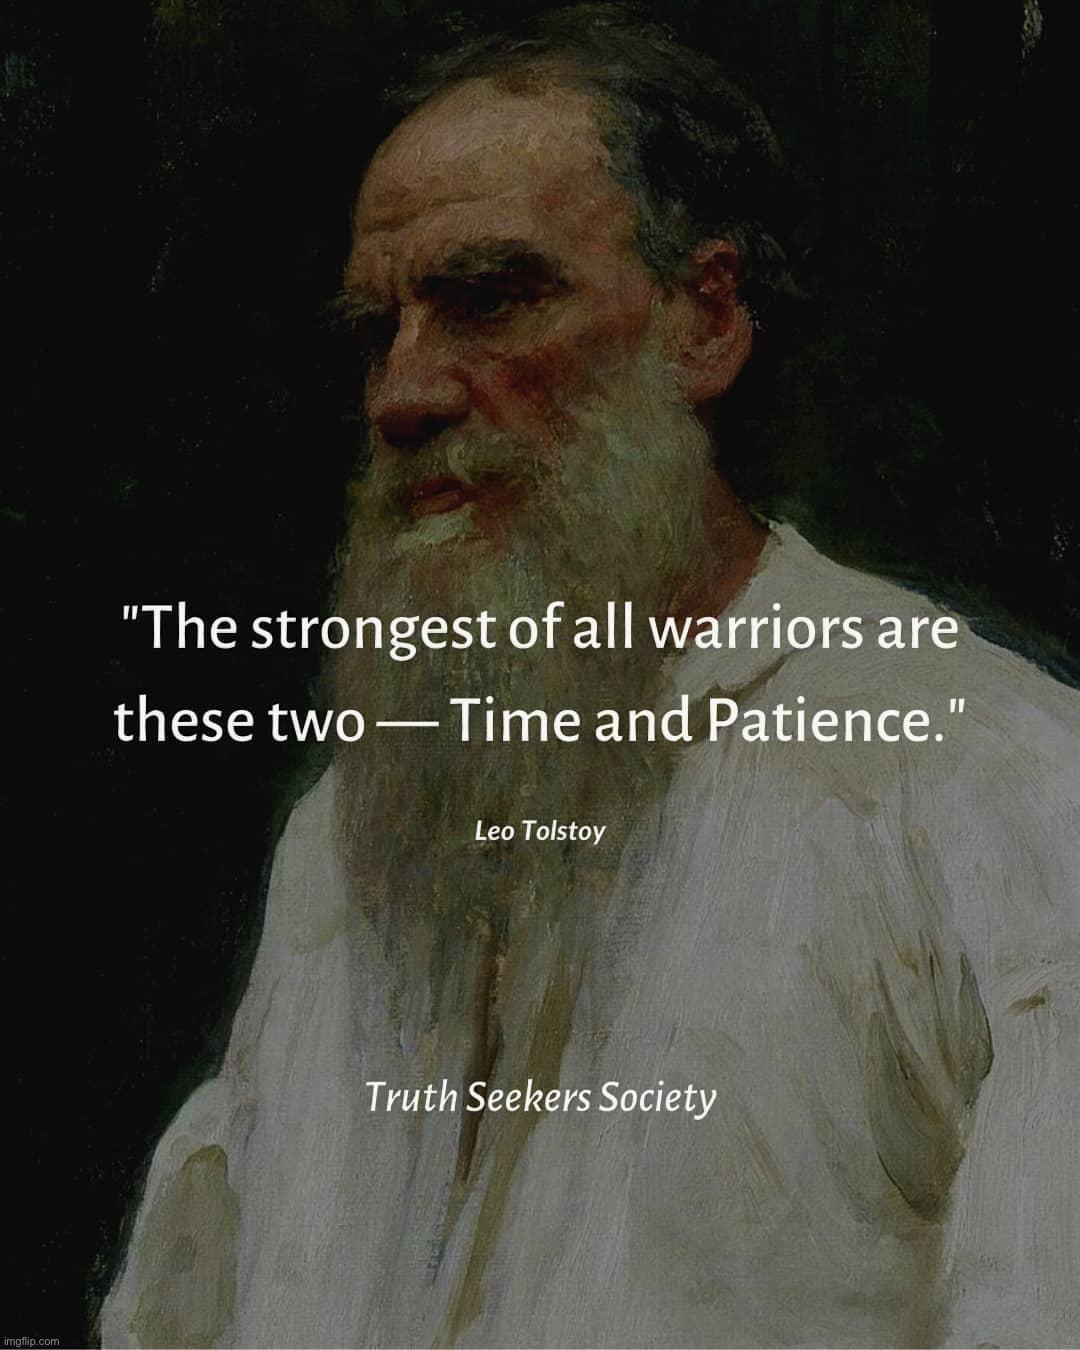 Leo Tolstoy quote | image tagged in leo tolstoy quote | made w/ Imgflip meme maker